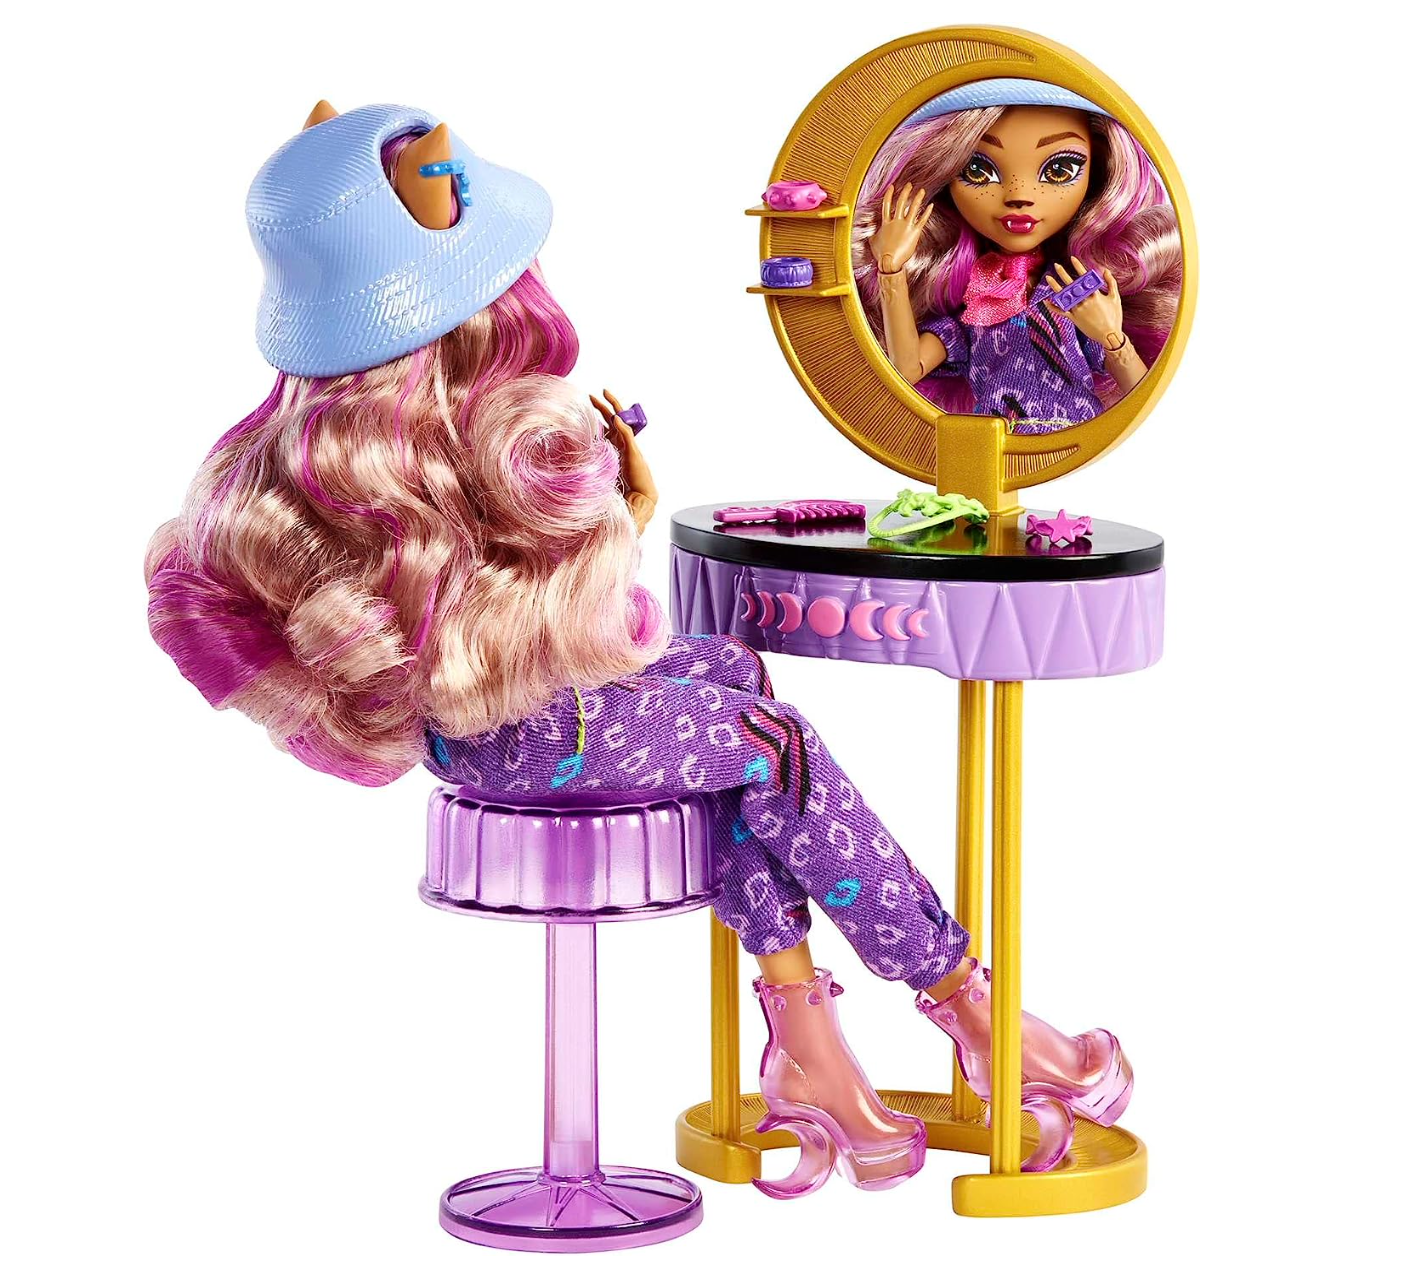 Monster High Doll and Playset, Clawdeen Wolf Boo-Tique Studio with Fashion Accessories, 20+ Pieces for Mix-And-Match Outfits